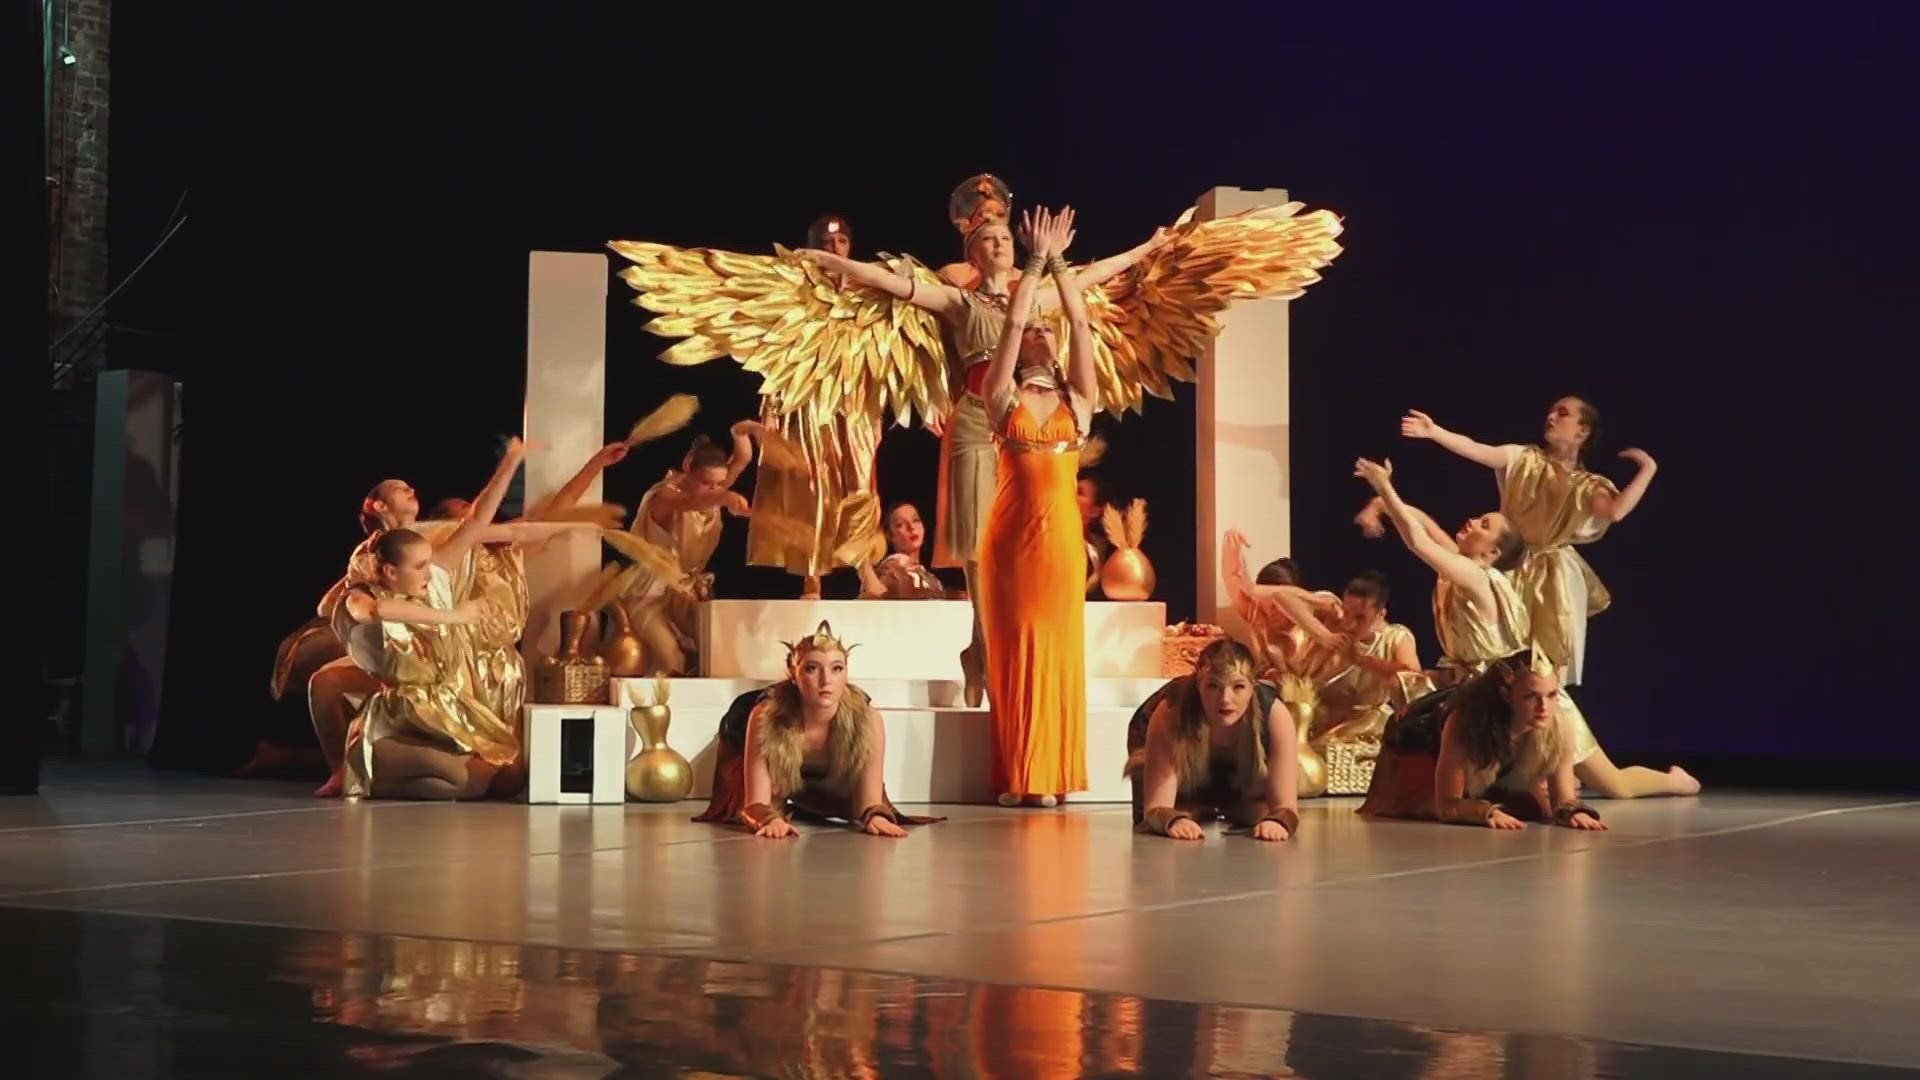 A local nonprofit dance company is showcasing the life of Cleopatra at the Bijou Theater.